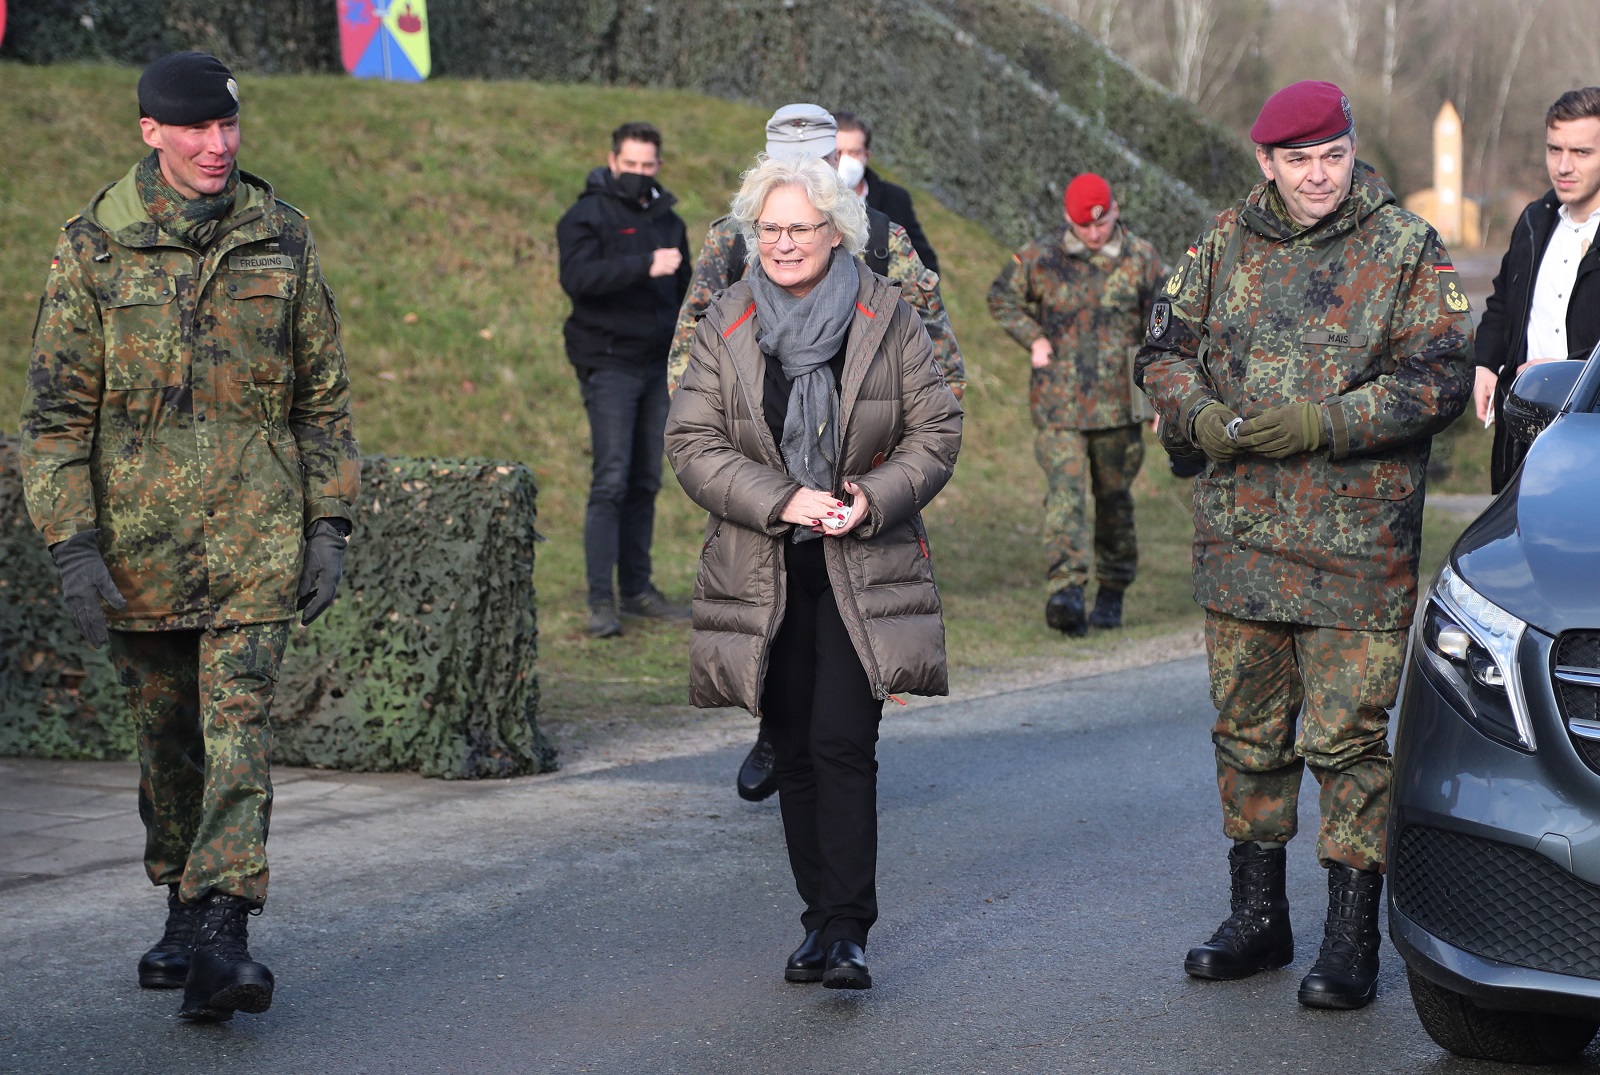 epa09735142 The German Minister of Defense Christine Lambrecht (C) with the commander of the 9th Panzerlehr Brigade Christian Freuding during her visit at the 9th Panzerlehr Brigade of the German Bundeswehr in Munster, northern Germany, 07 February 2022. At the moment, 200 soldiers of the 9th Panzerlehr Brigade take part in the NATO mission enhanced Forward Presence (eFP) in Lithuania.  EPA/FOCKE STRANGMANN